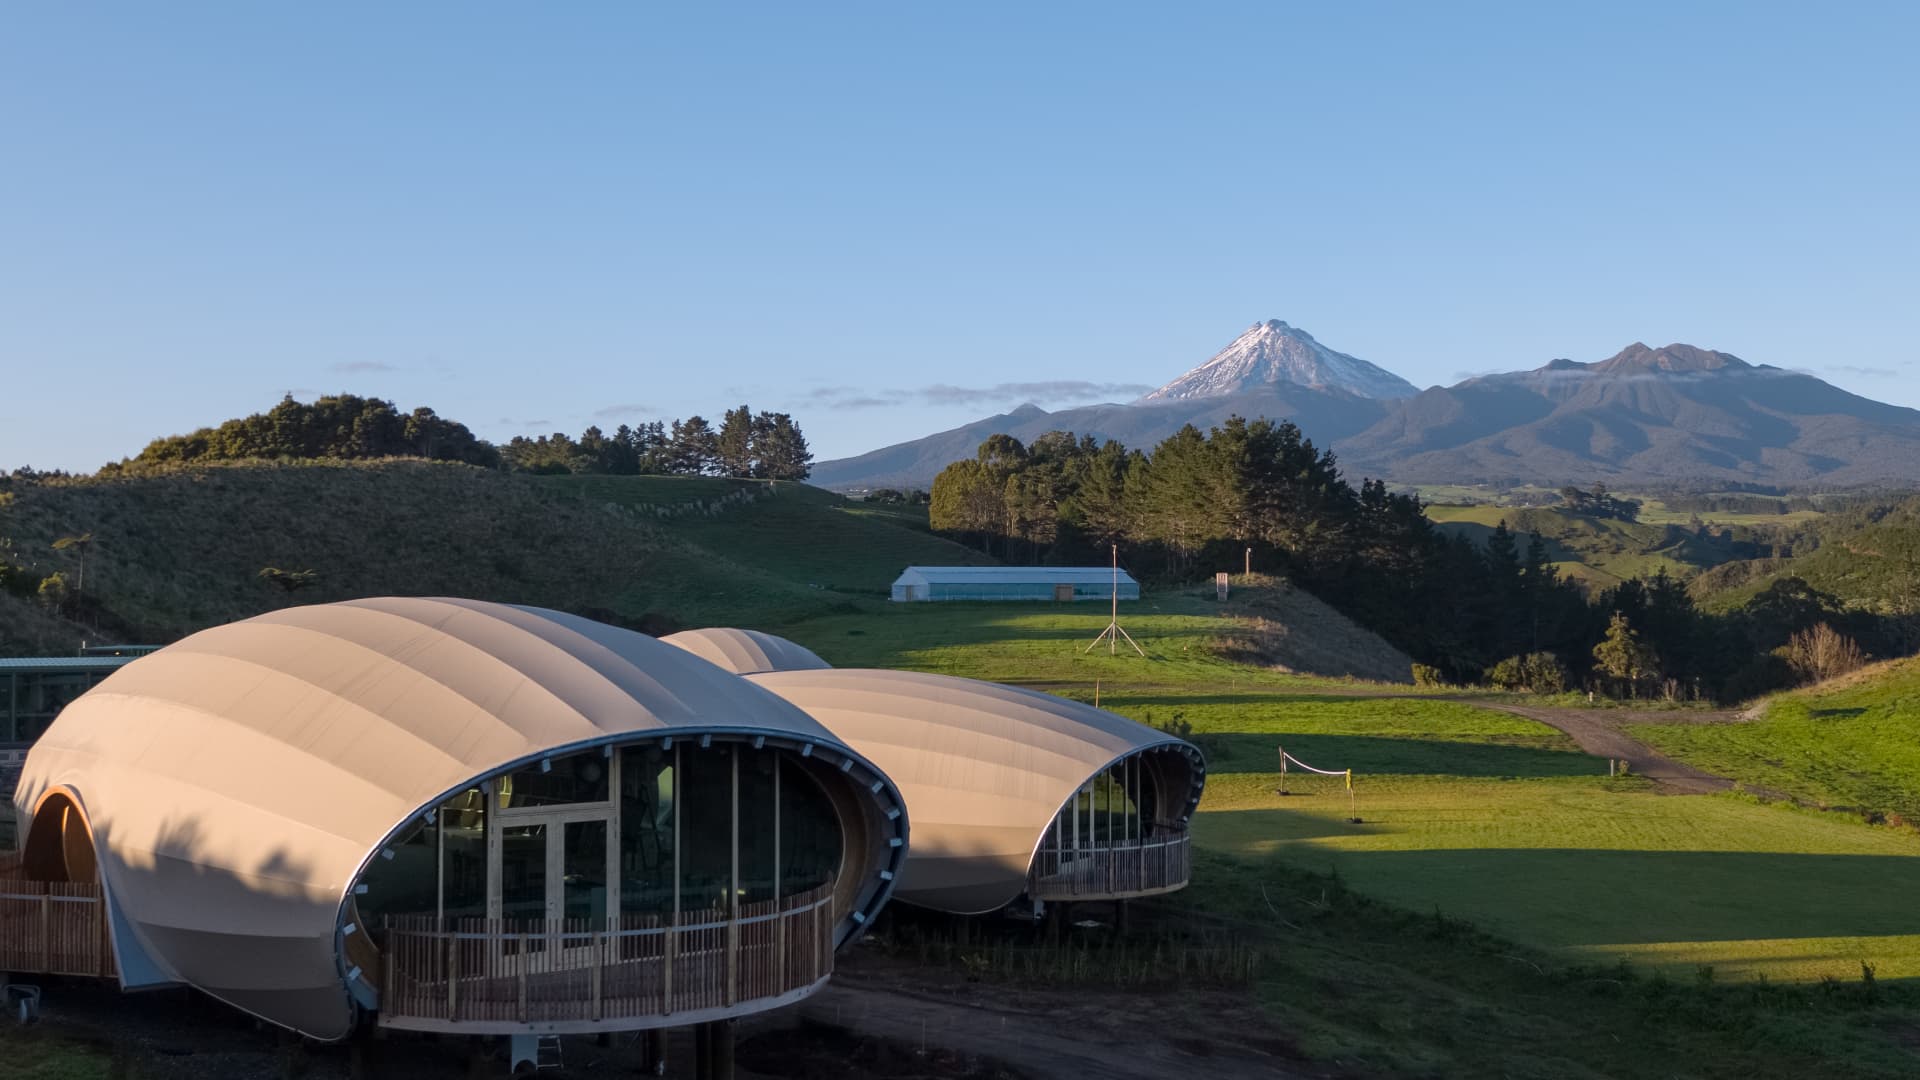 Green School International's second location, situated in Taranaki on the west coast of New Zealand.